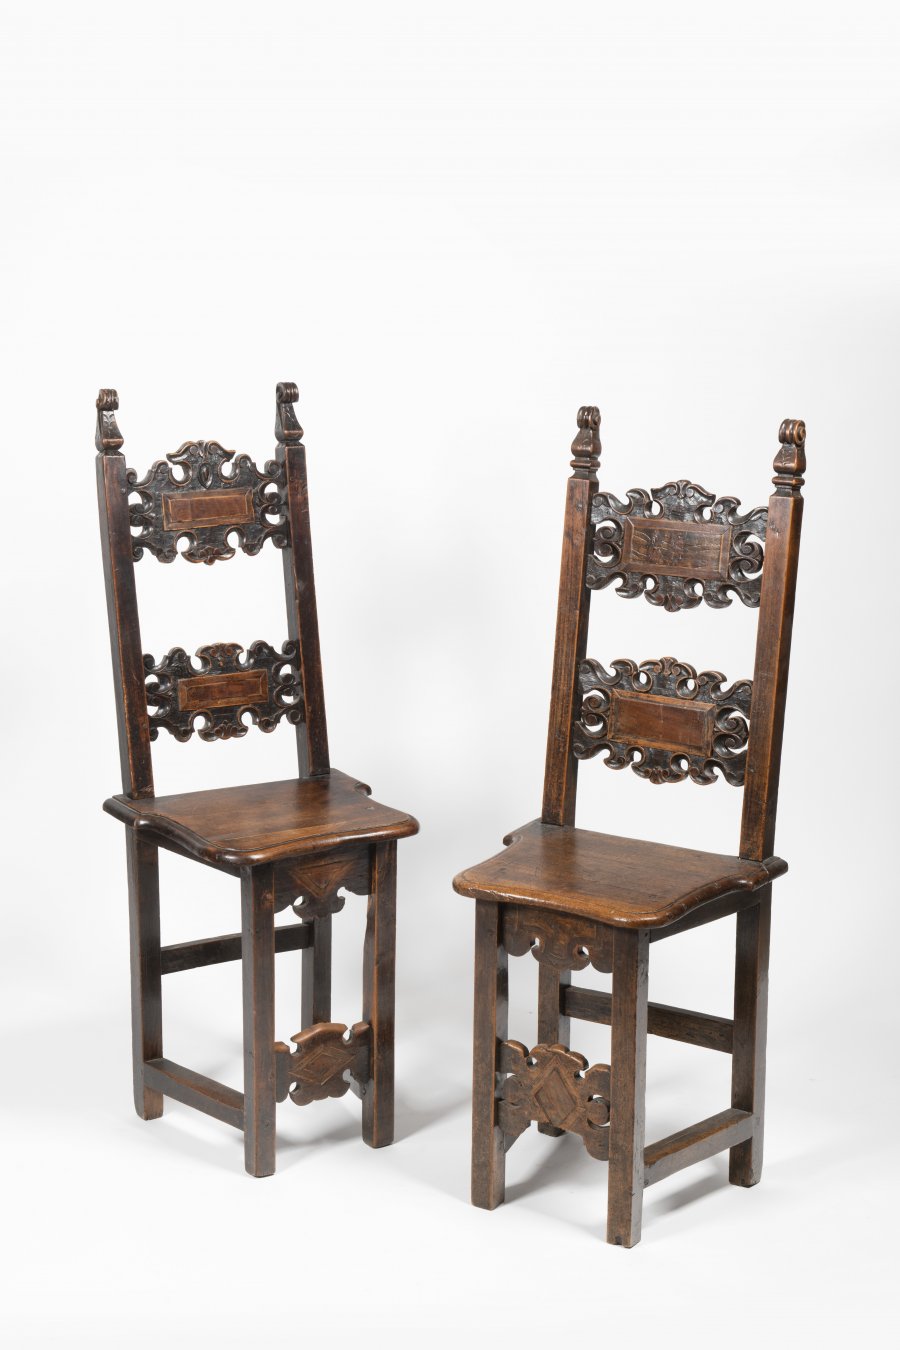 PAIR OF MANYRISTIC CHAIRS